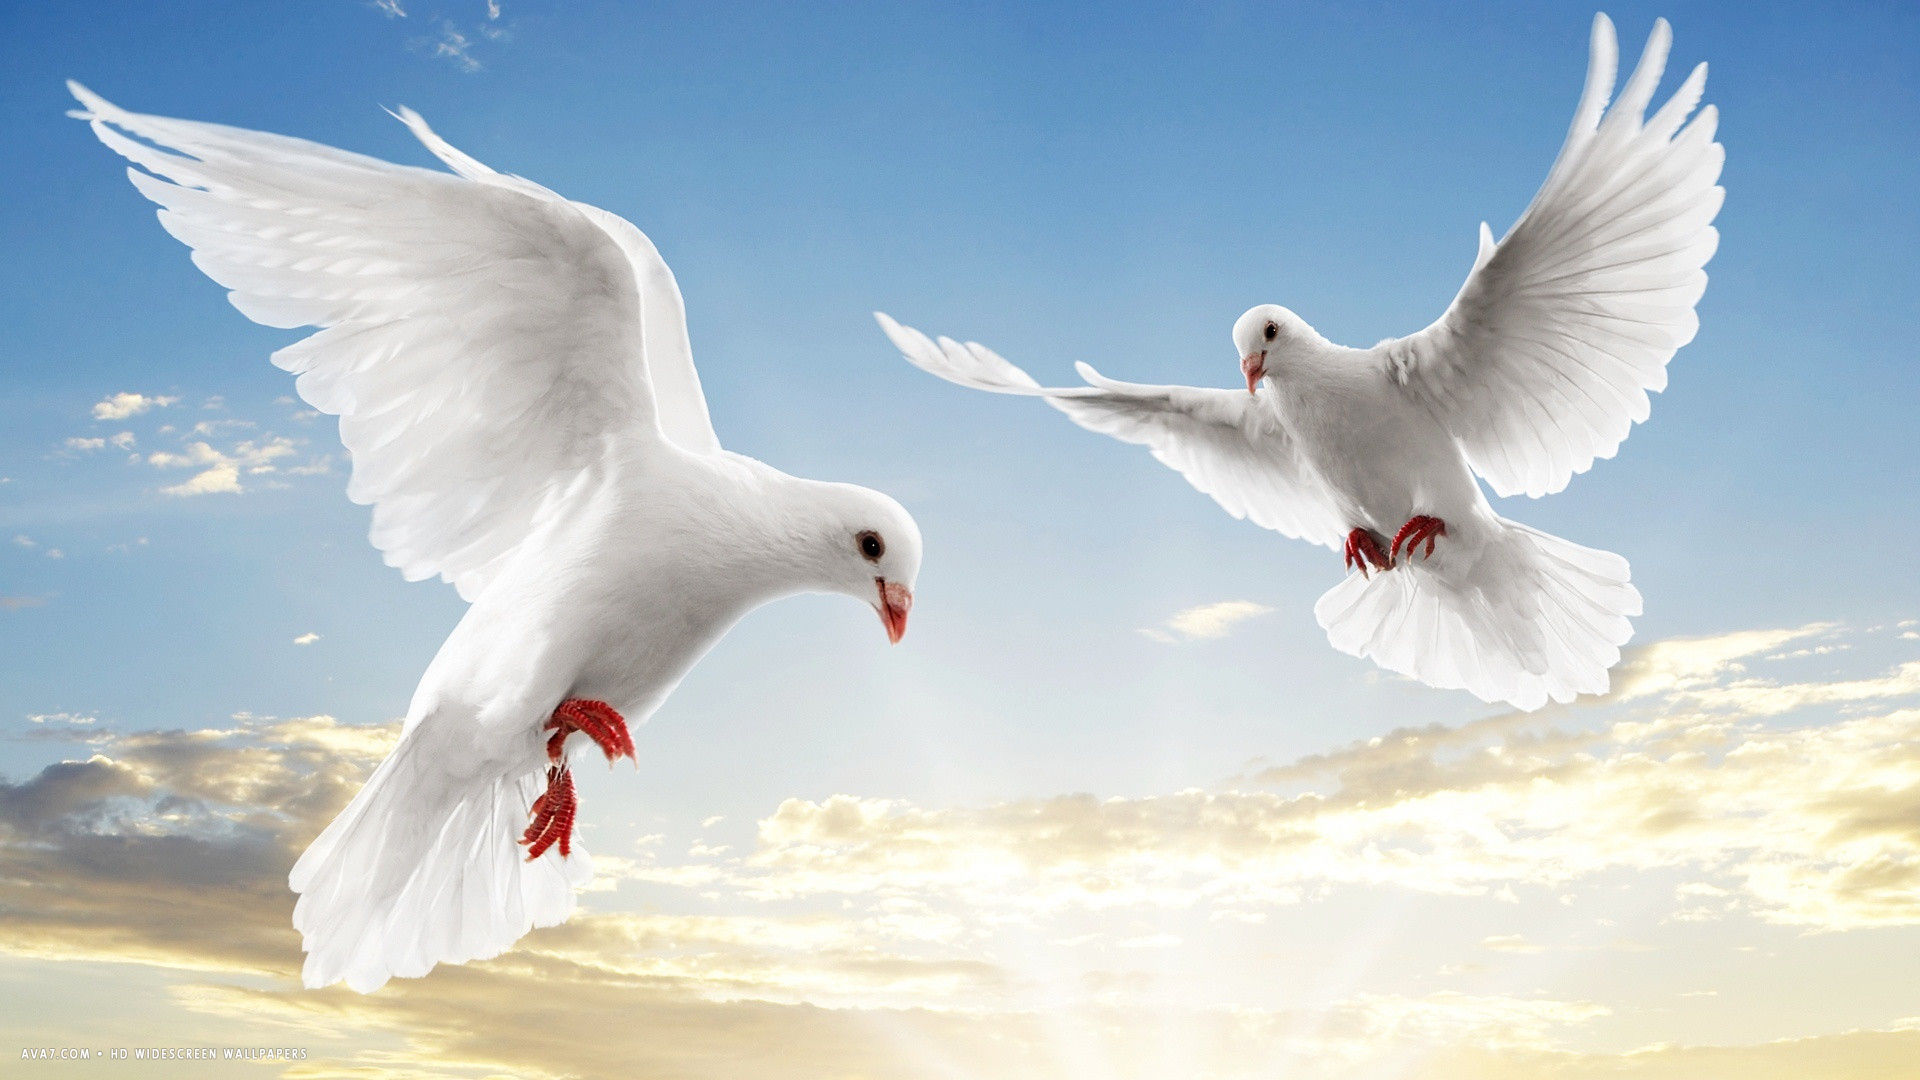 Sky With Birds Wallpapers